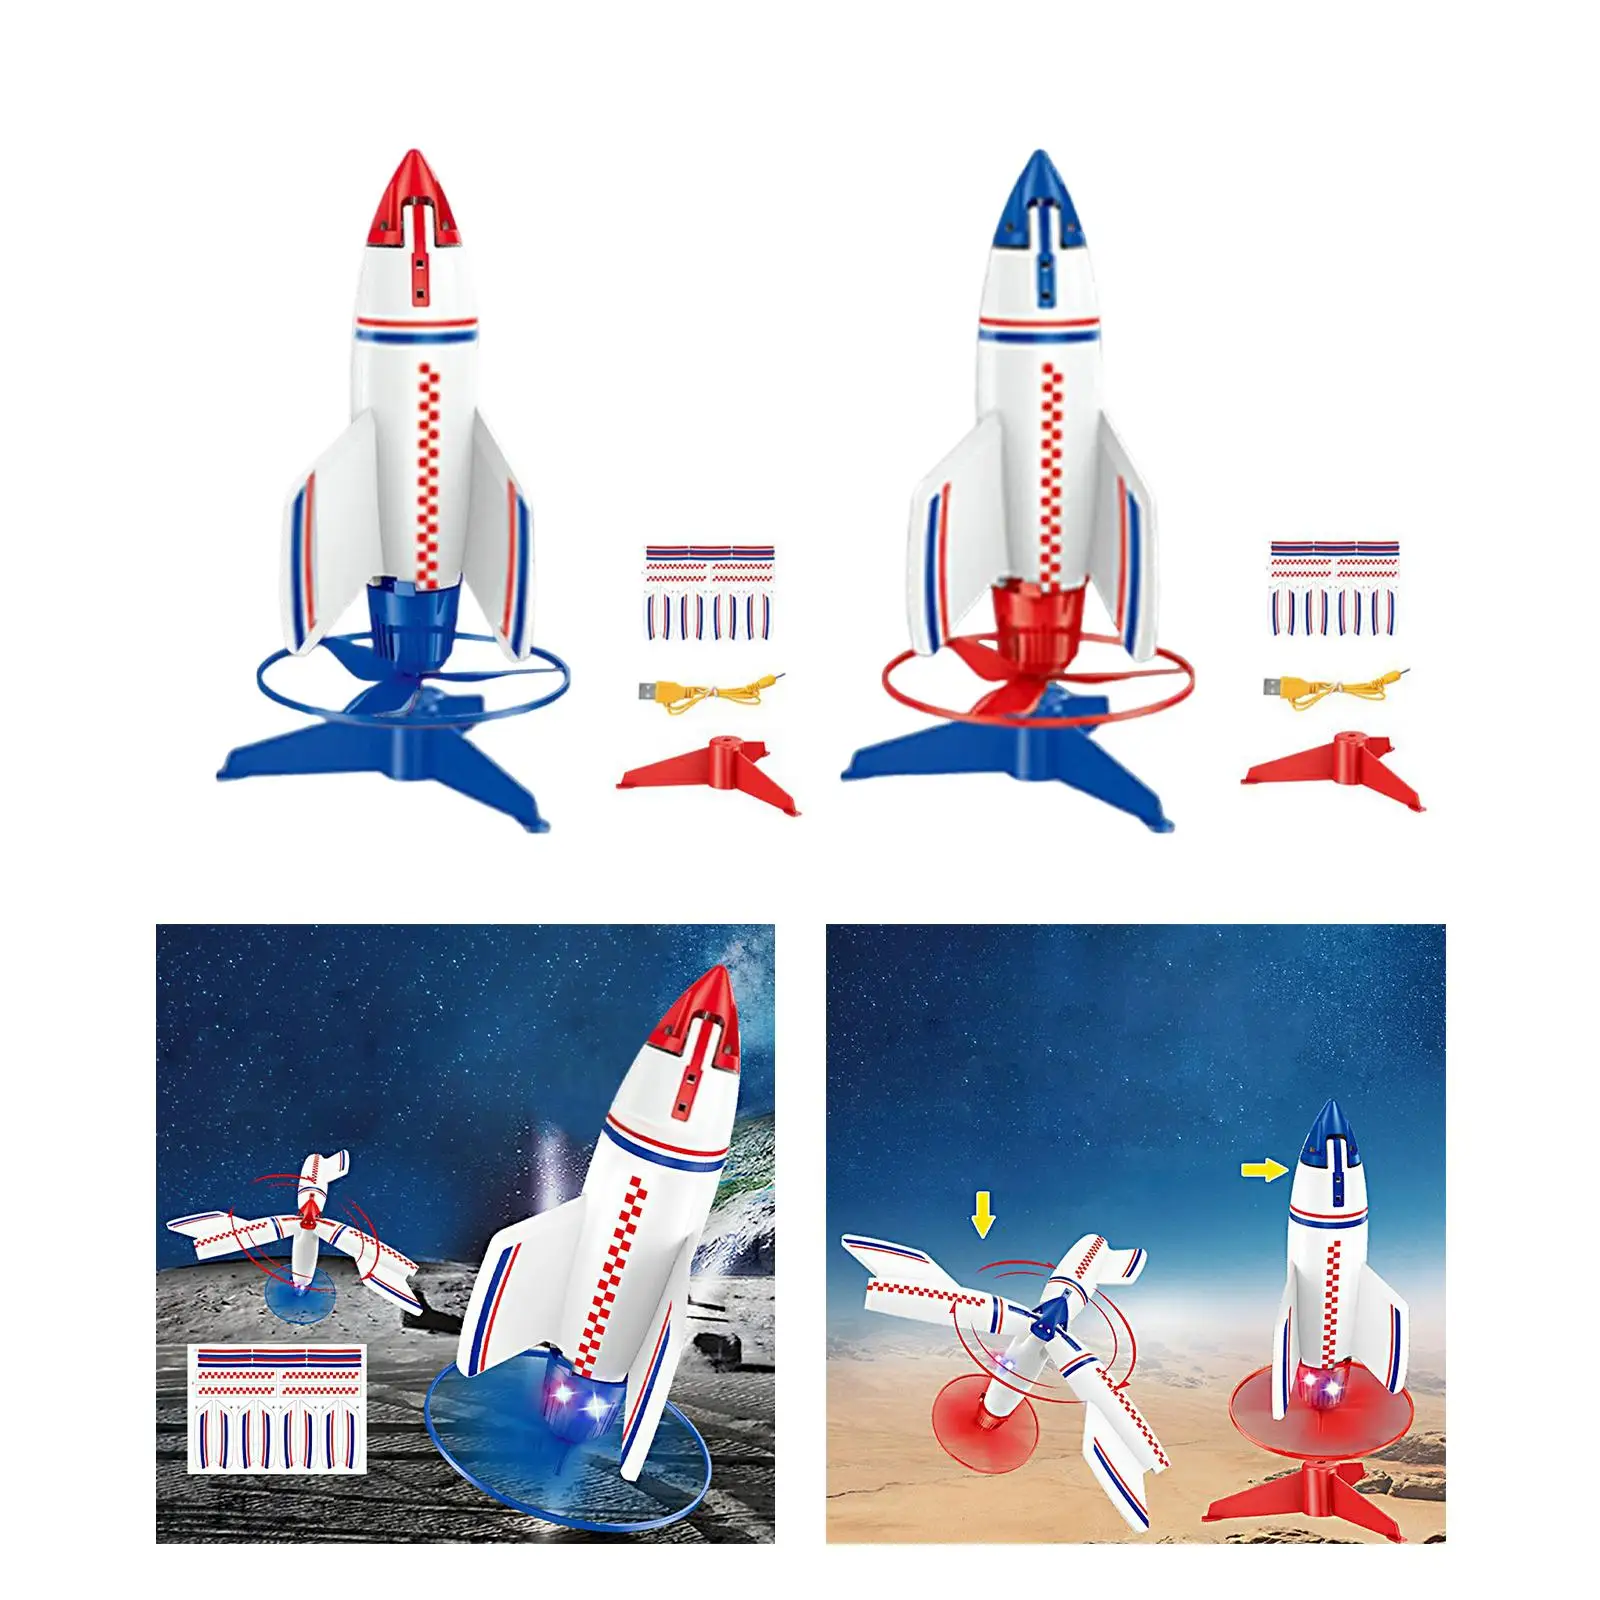 rocket Launcher Toys Fly Higher with light Outdoor Toy Rockets Model Foam Rockets Games Activities for Boys and Girls